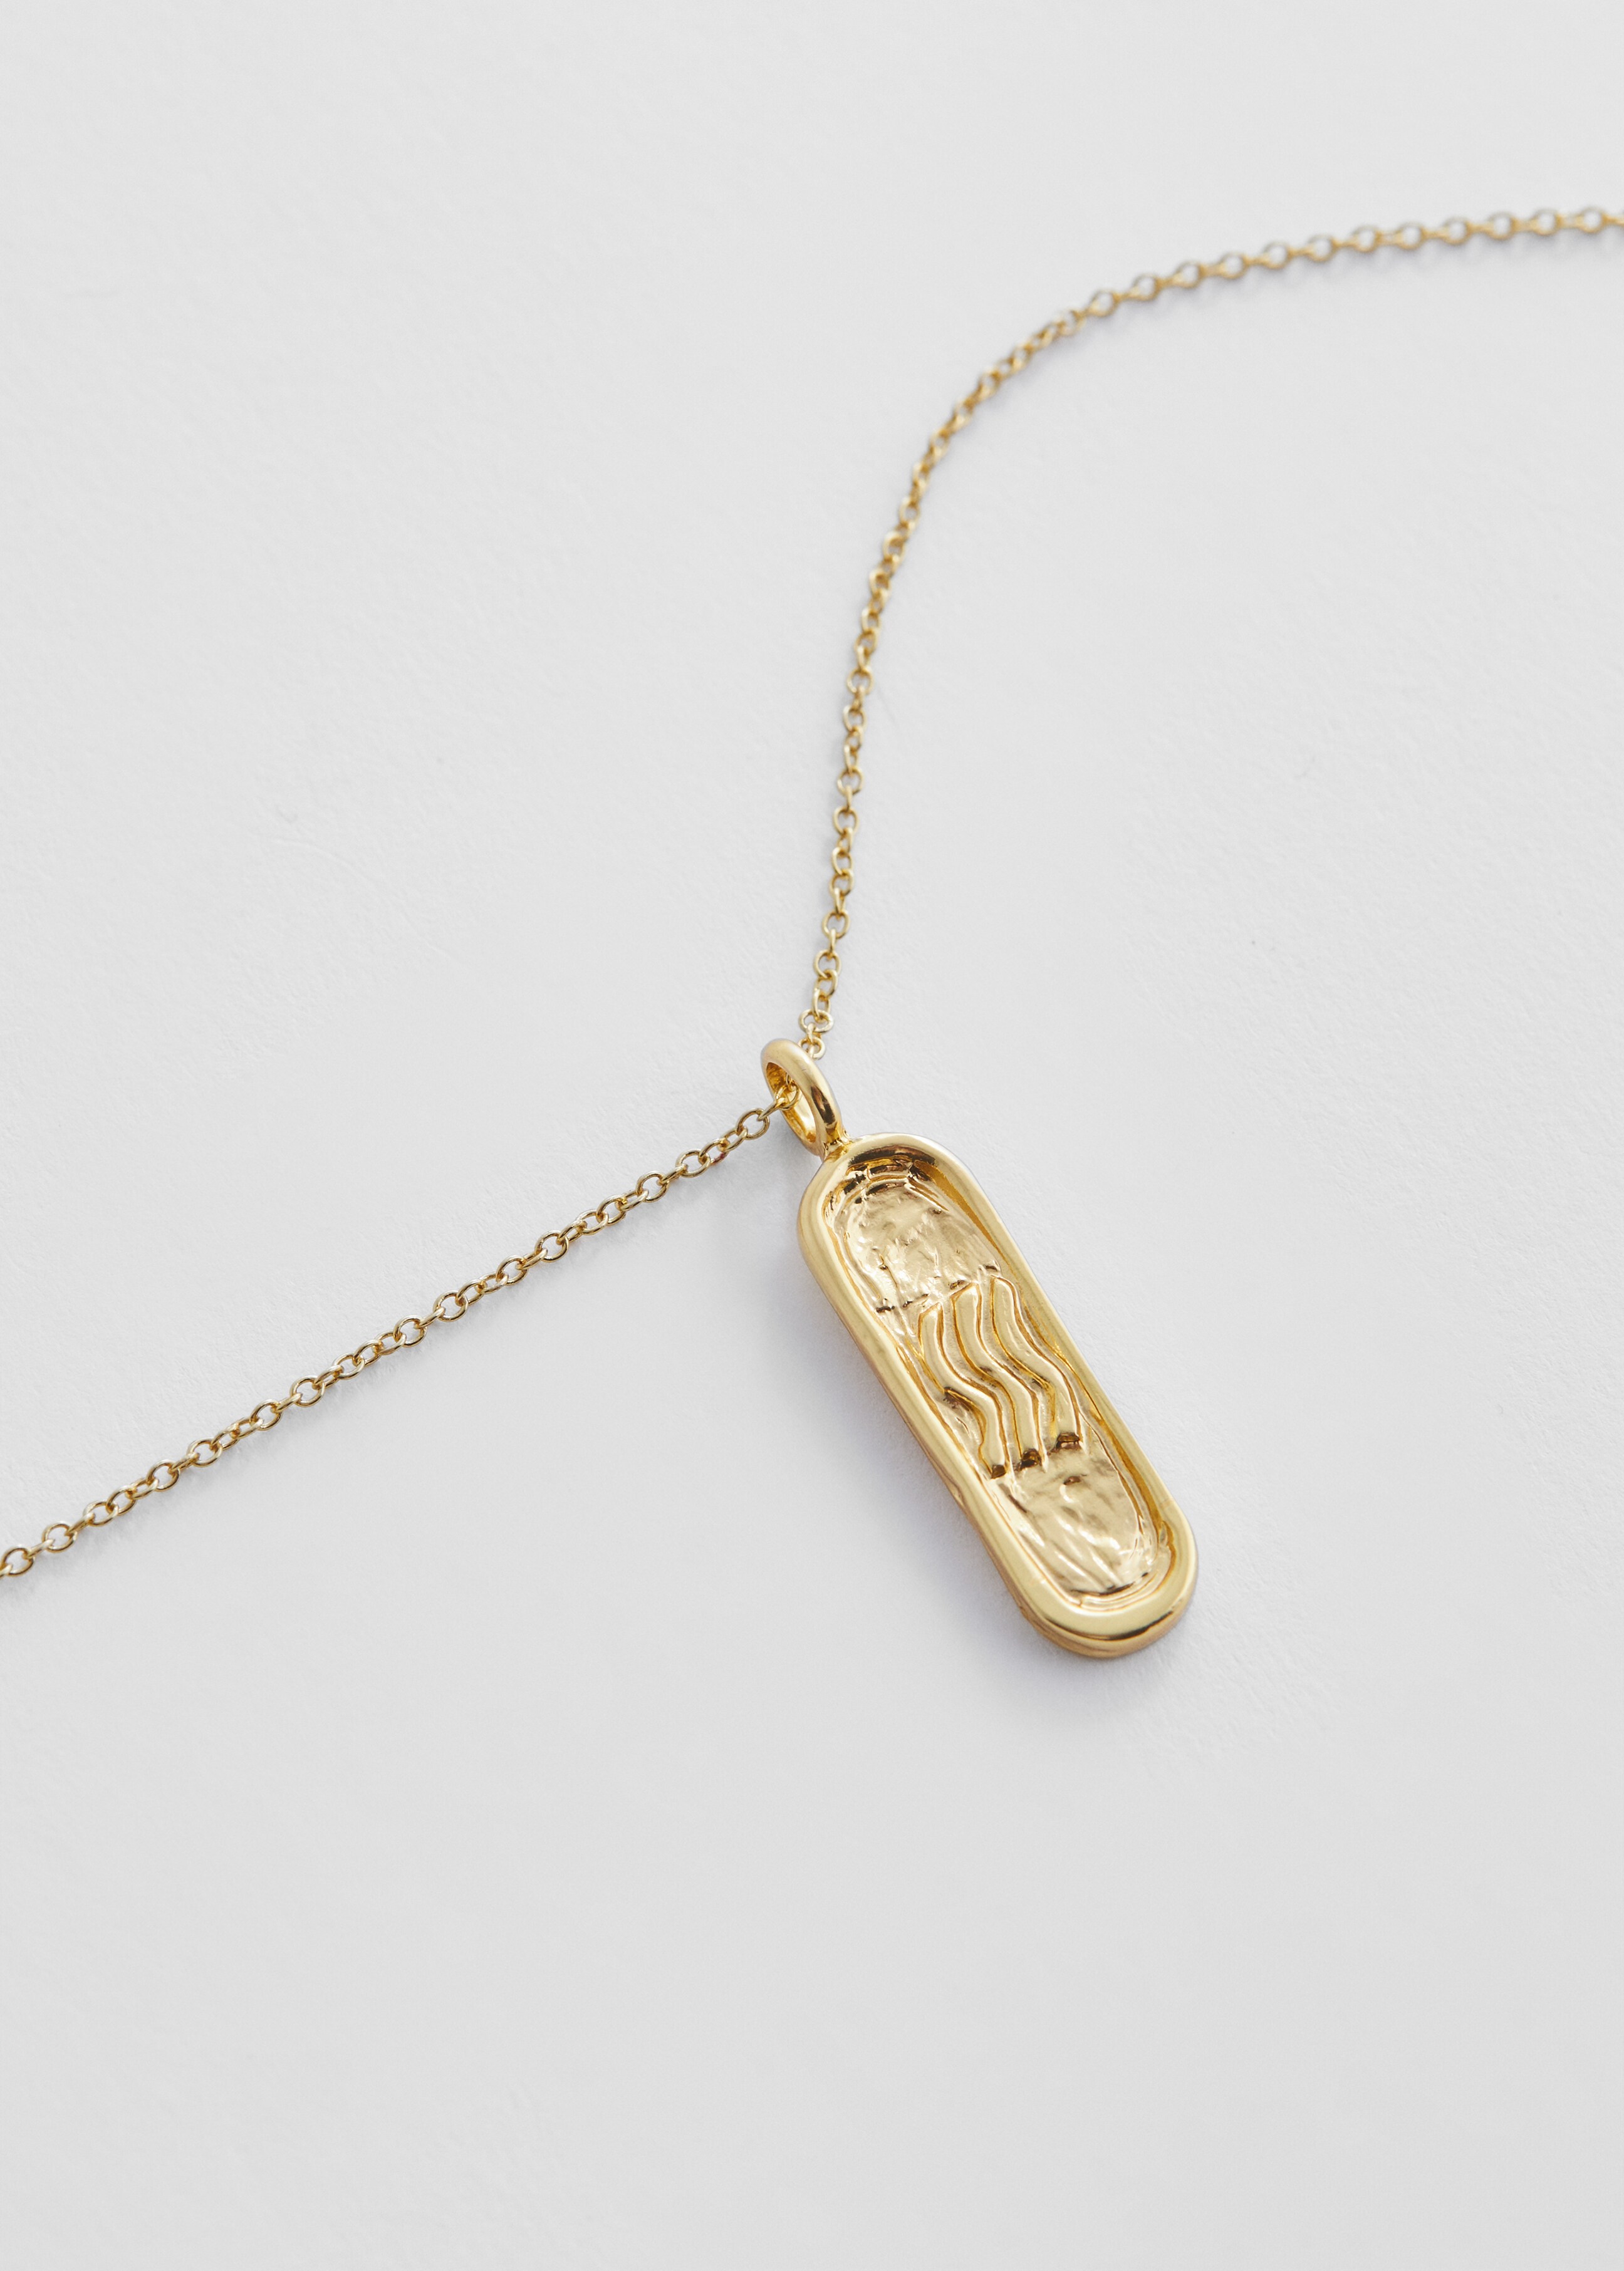 Seal pendant necklace - Details of the article 1